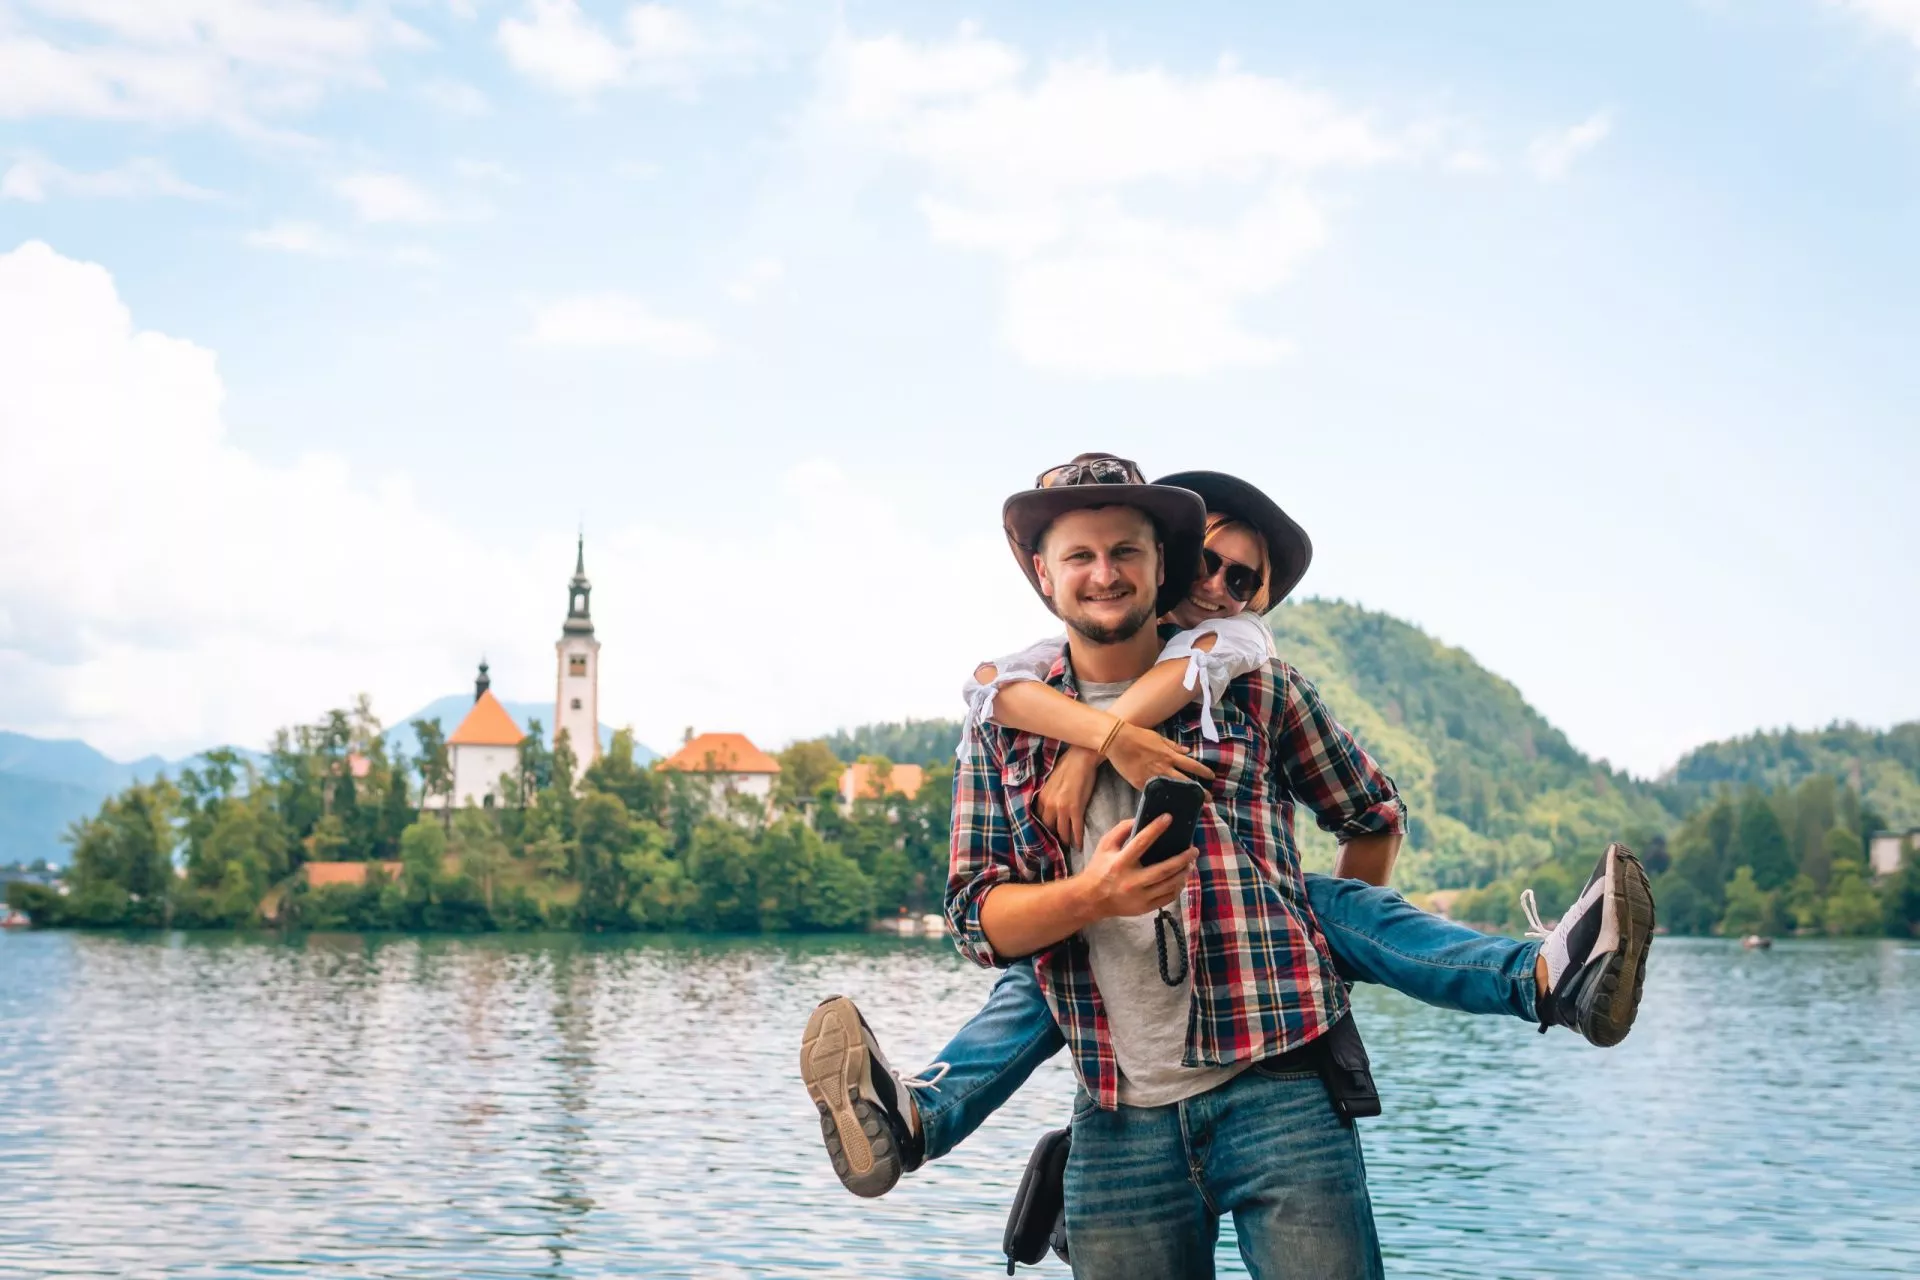 Smile at the Alpine jewel of Lake Bled